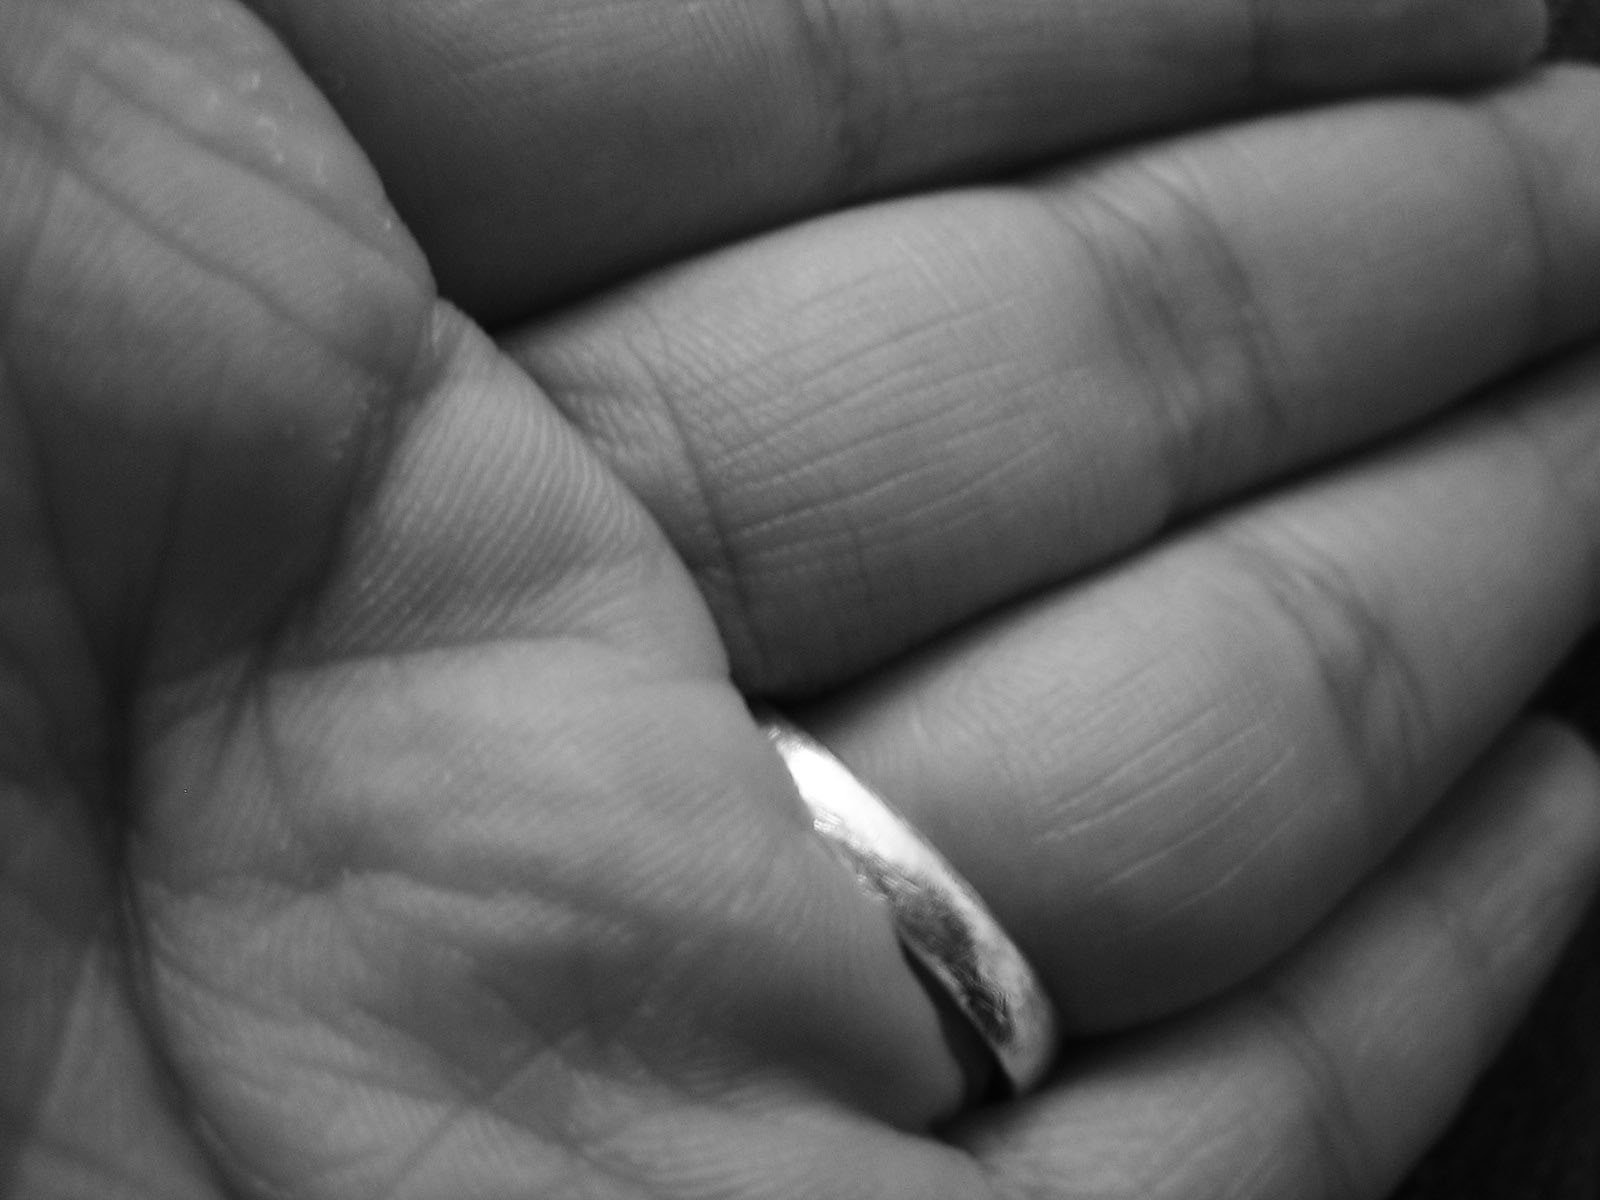 a person holding a hand with a small silver ring in it